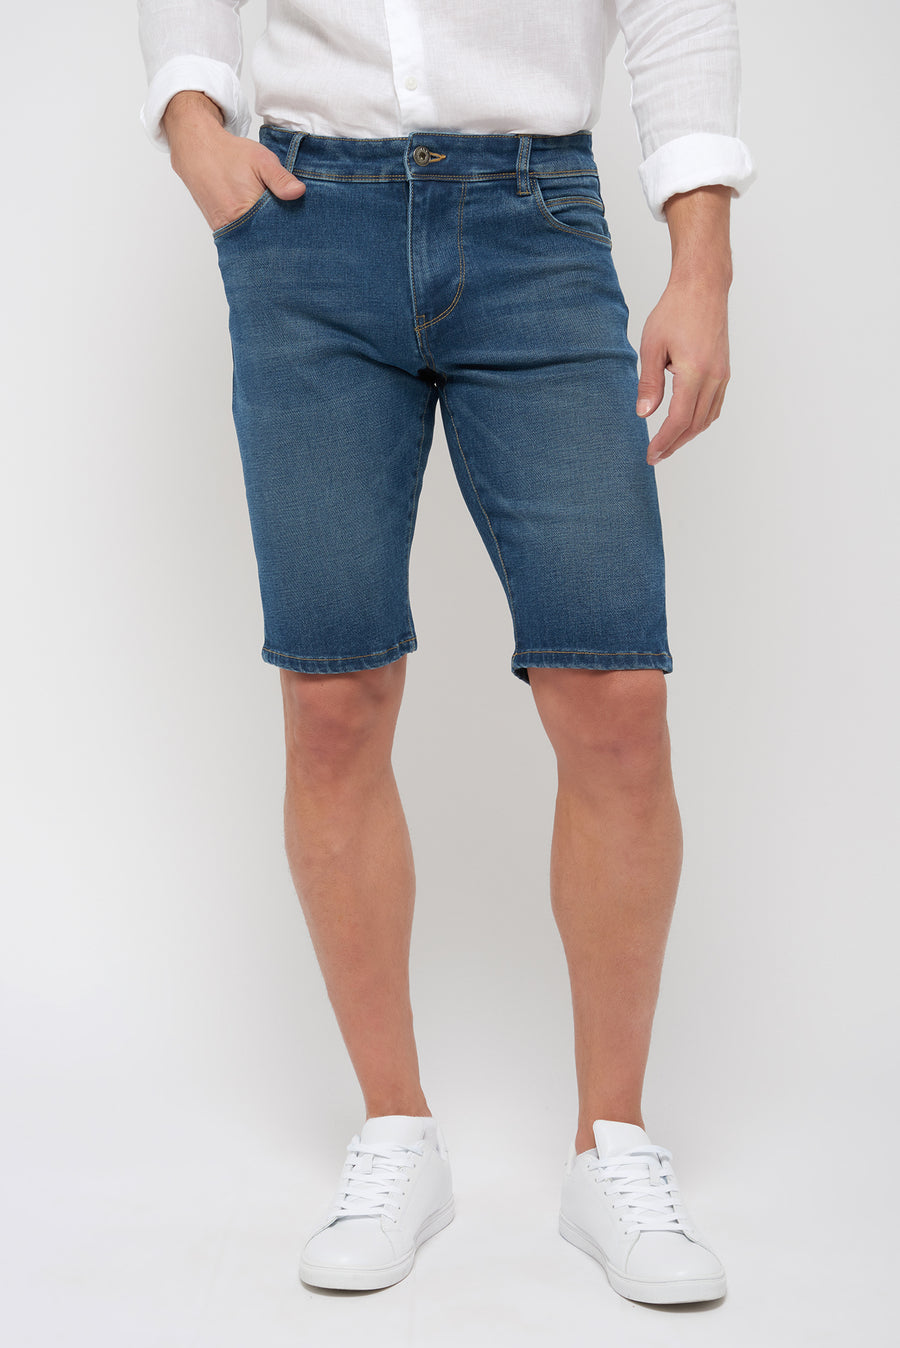 Recycled jean shorts - Slim fit - Light tone